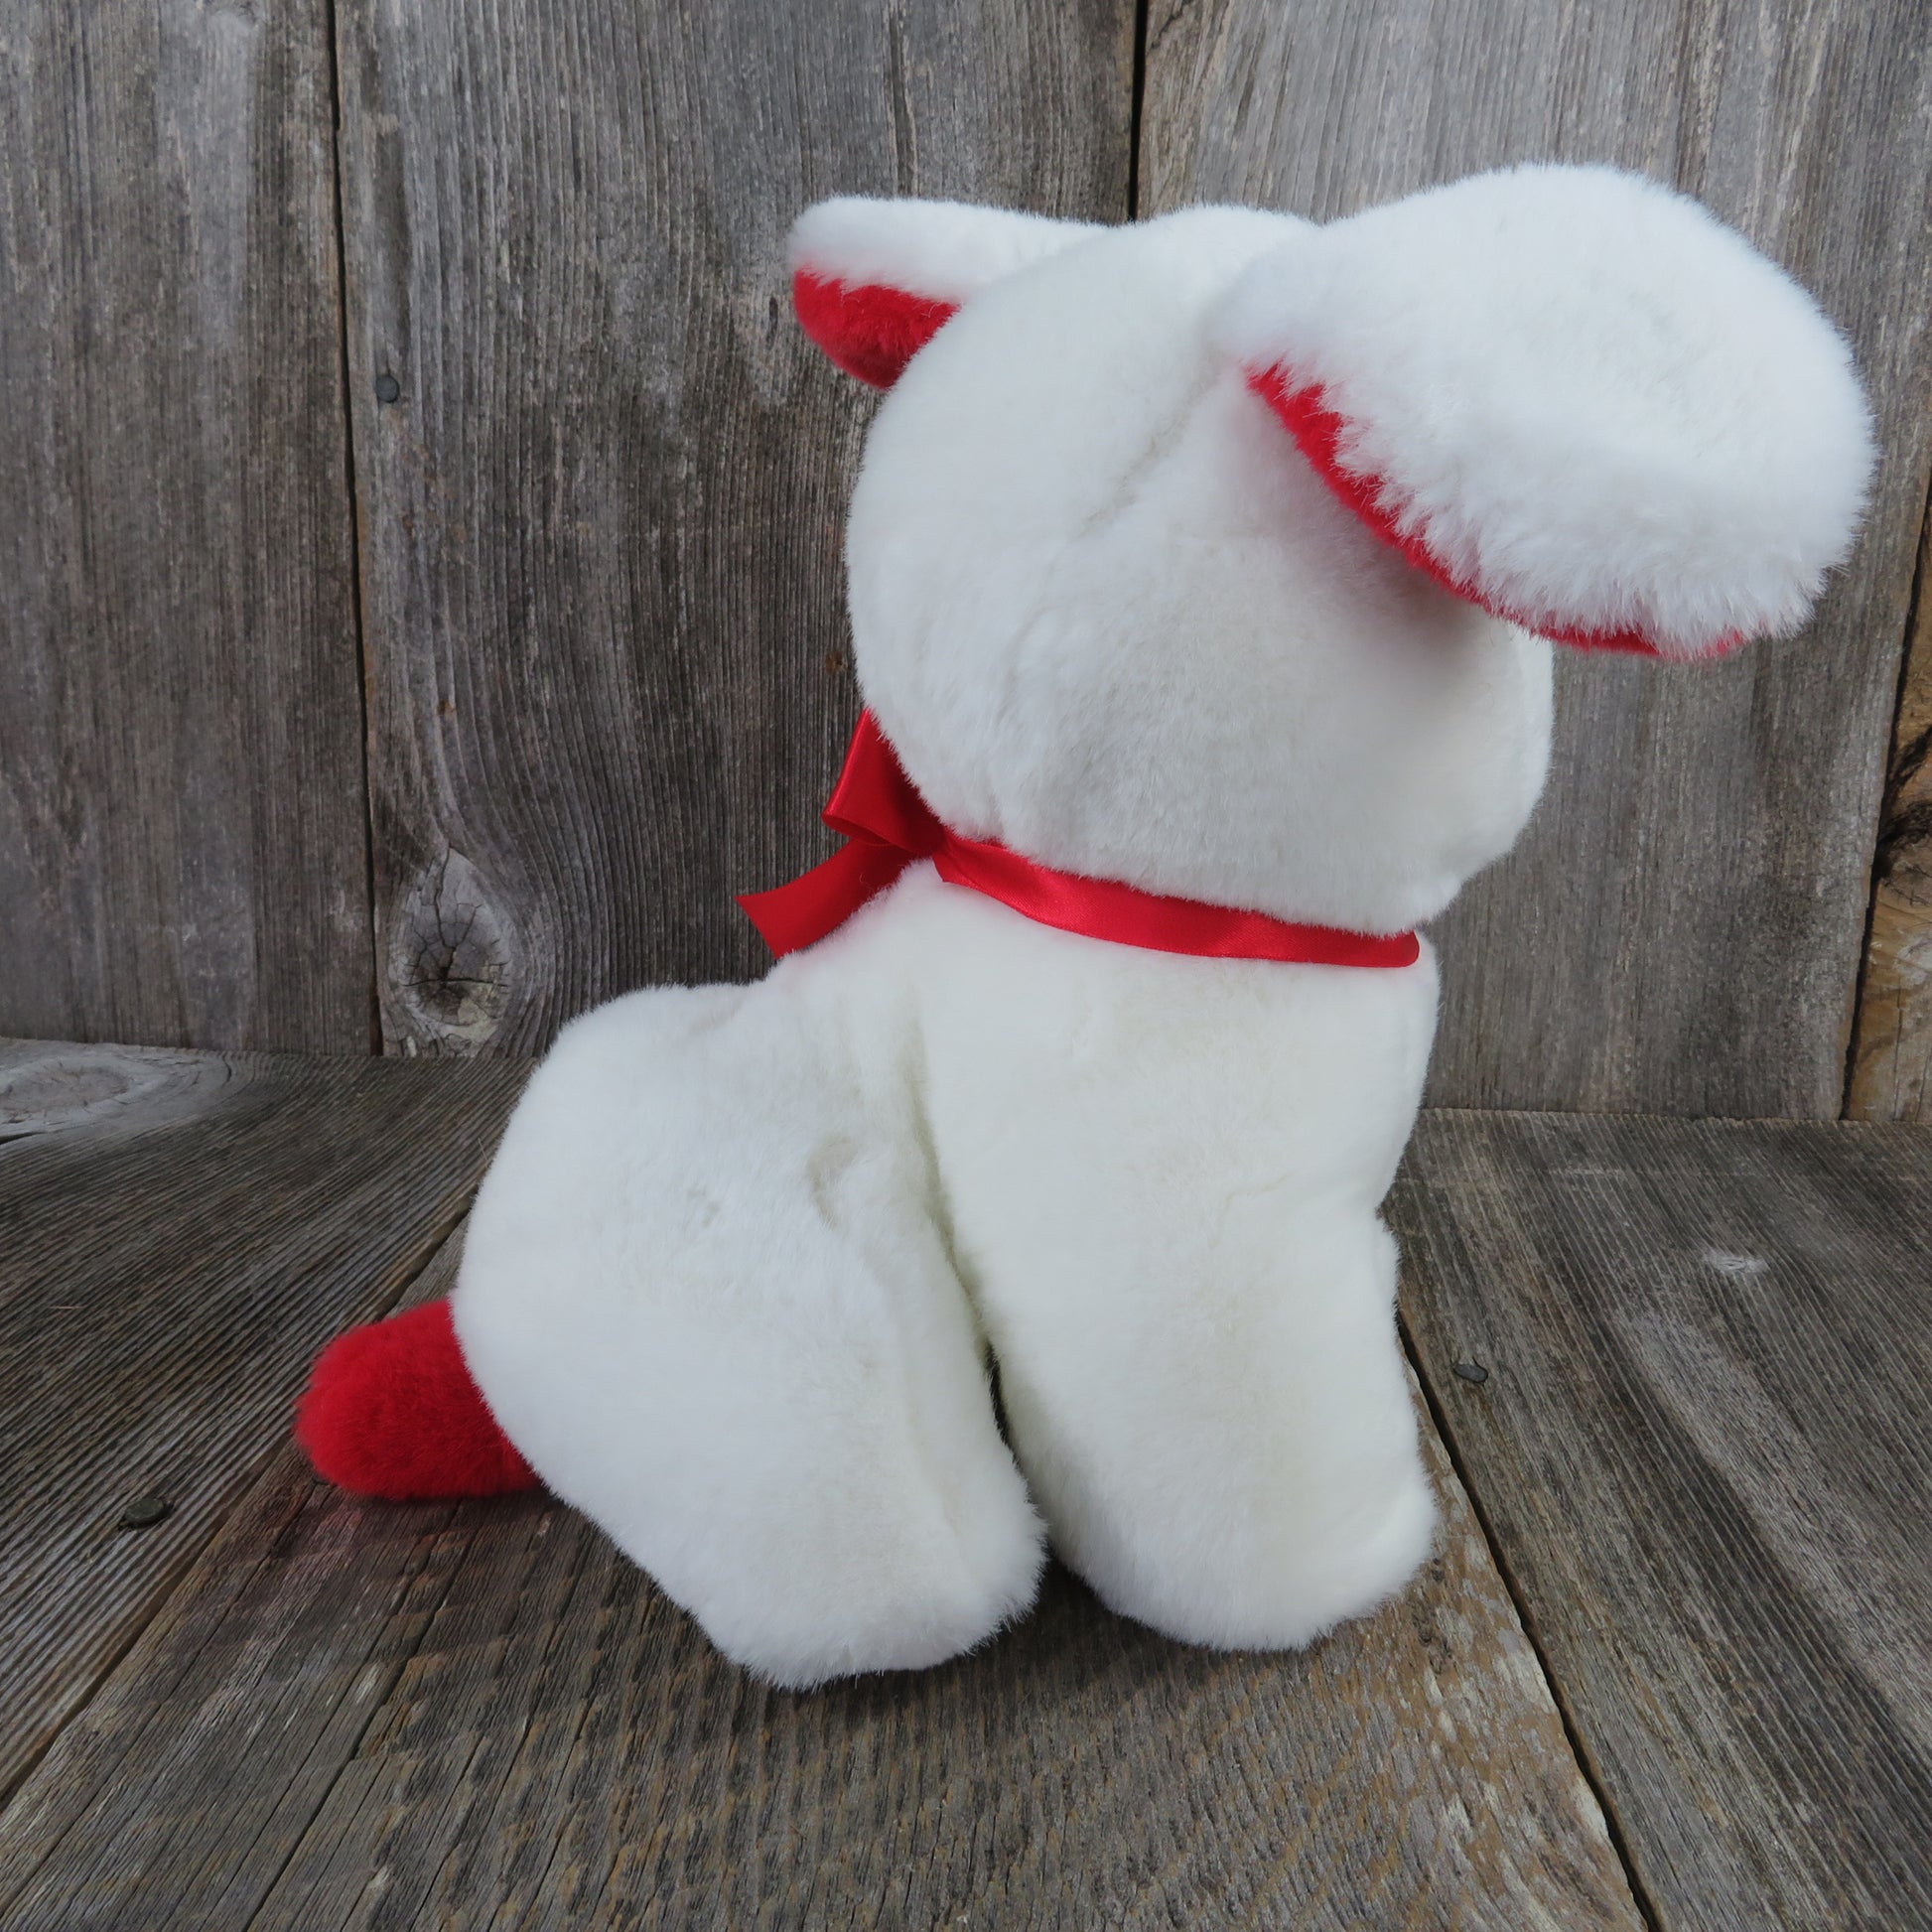 Vintage White Dog Puppy Plush Heart Shaped Flocked Nose Red Ears Mervyn's Playful Plush Red Bow Korea - At Grandma's Table